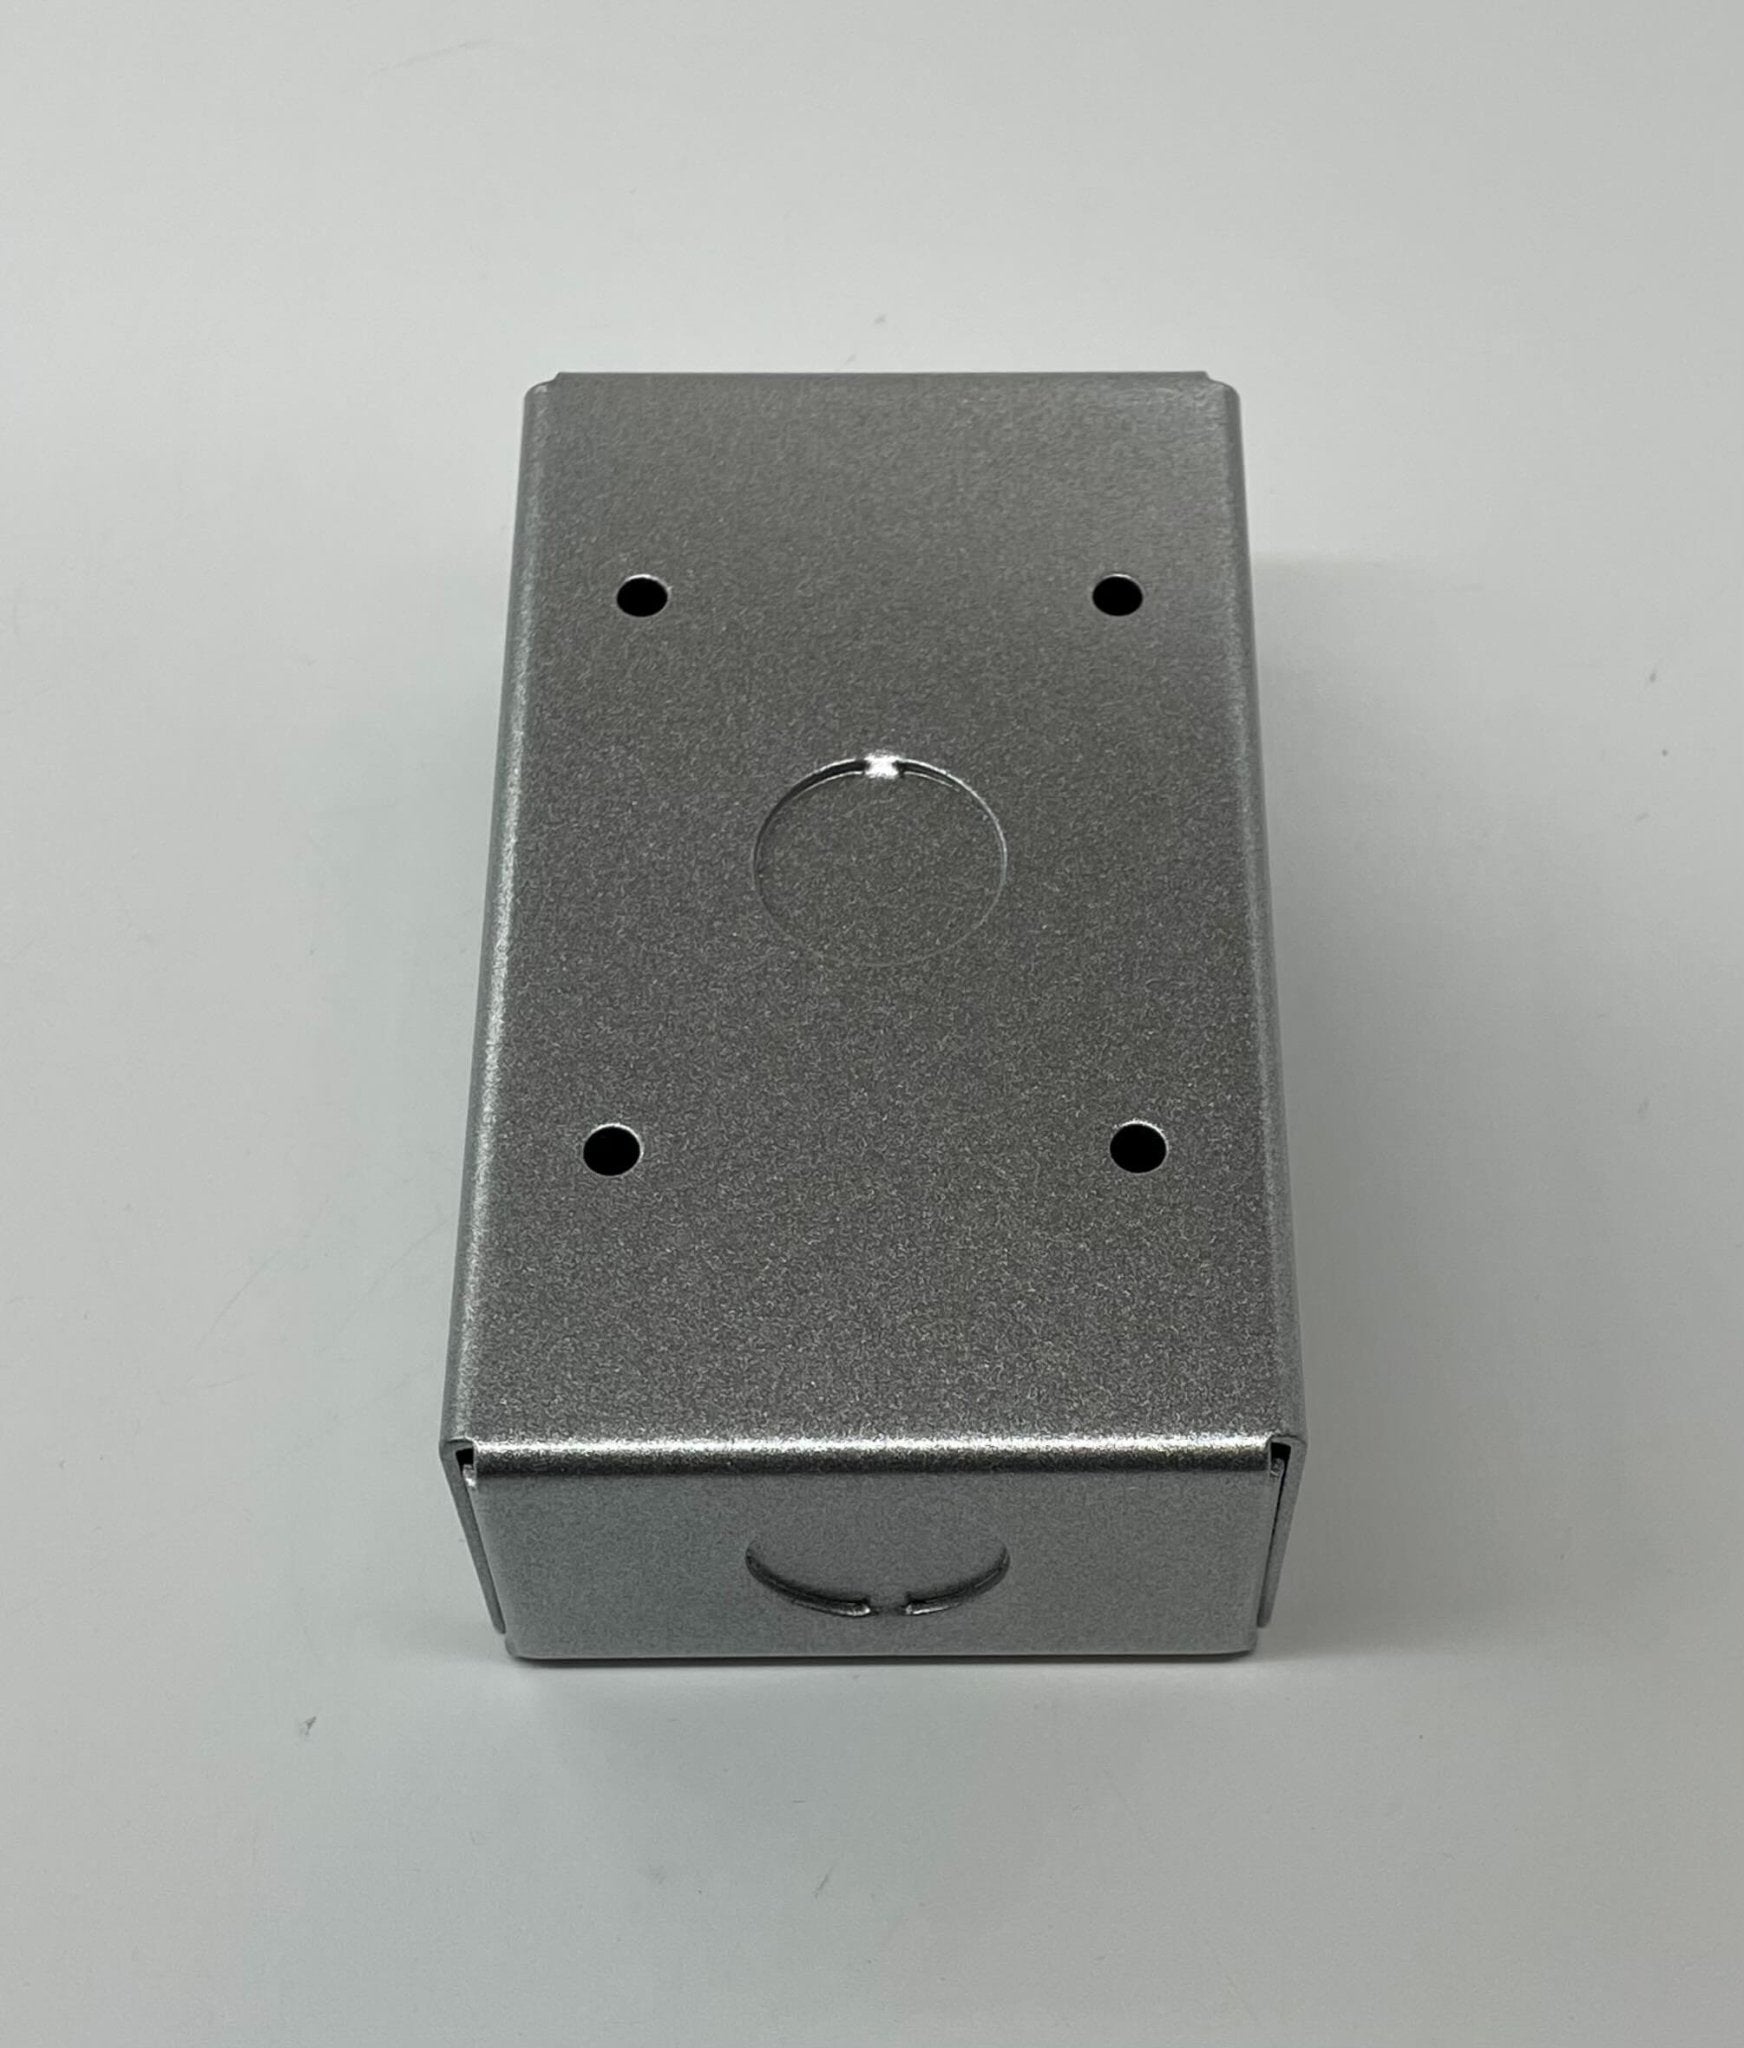 RSG DH24120SPC | Electromagnetic Fire Door Holder - The Fire Alarm Supplier